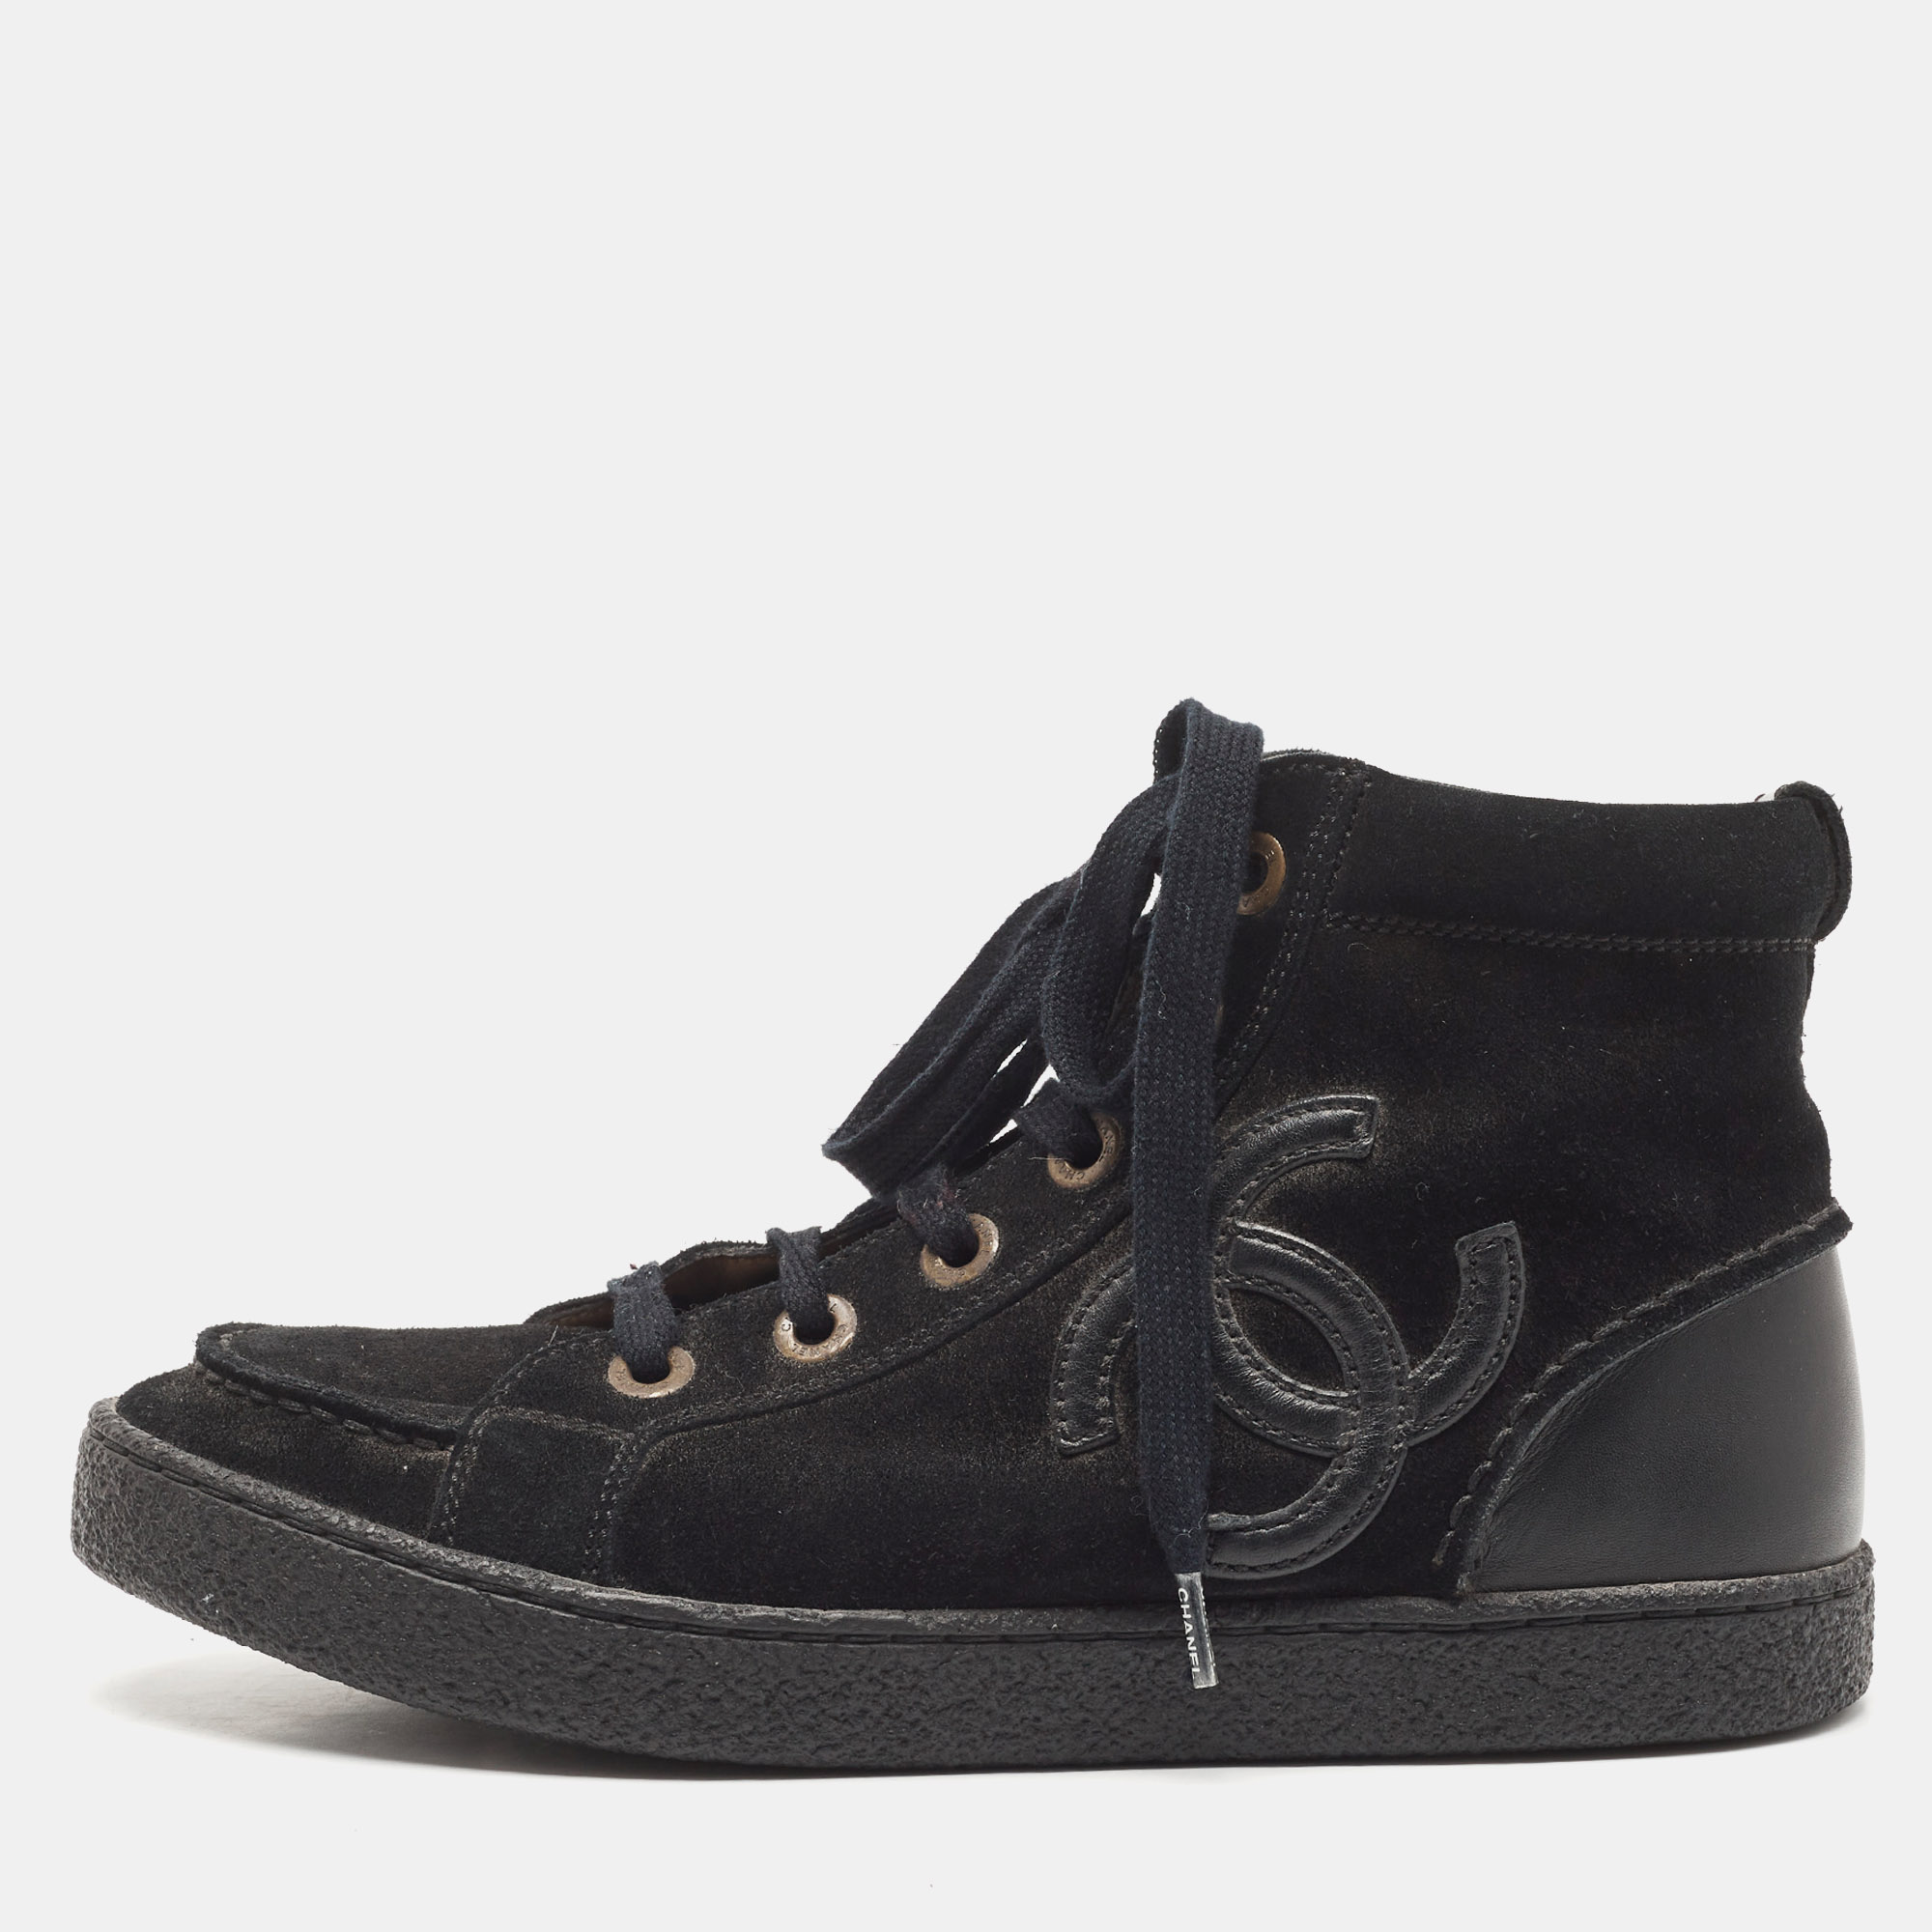 Chanel Black Leather And Suede CC High Top Sneakers Size 37